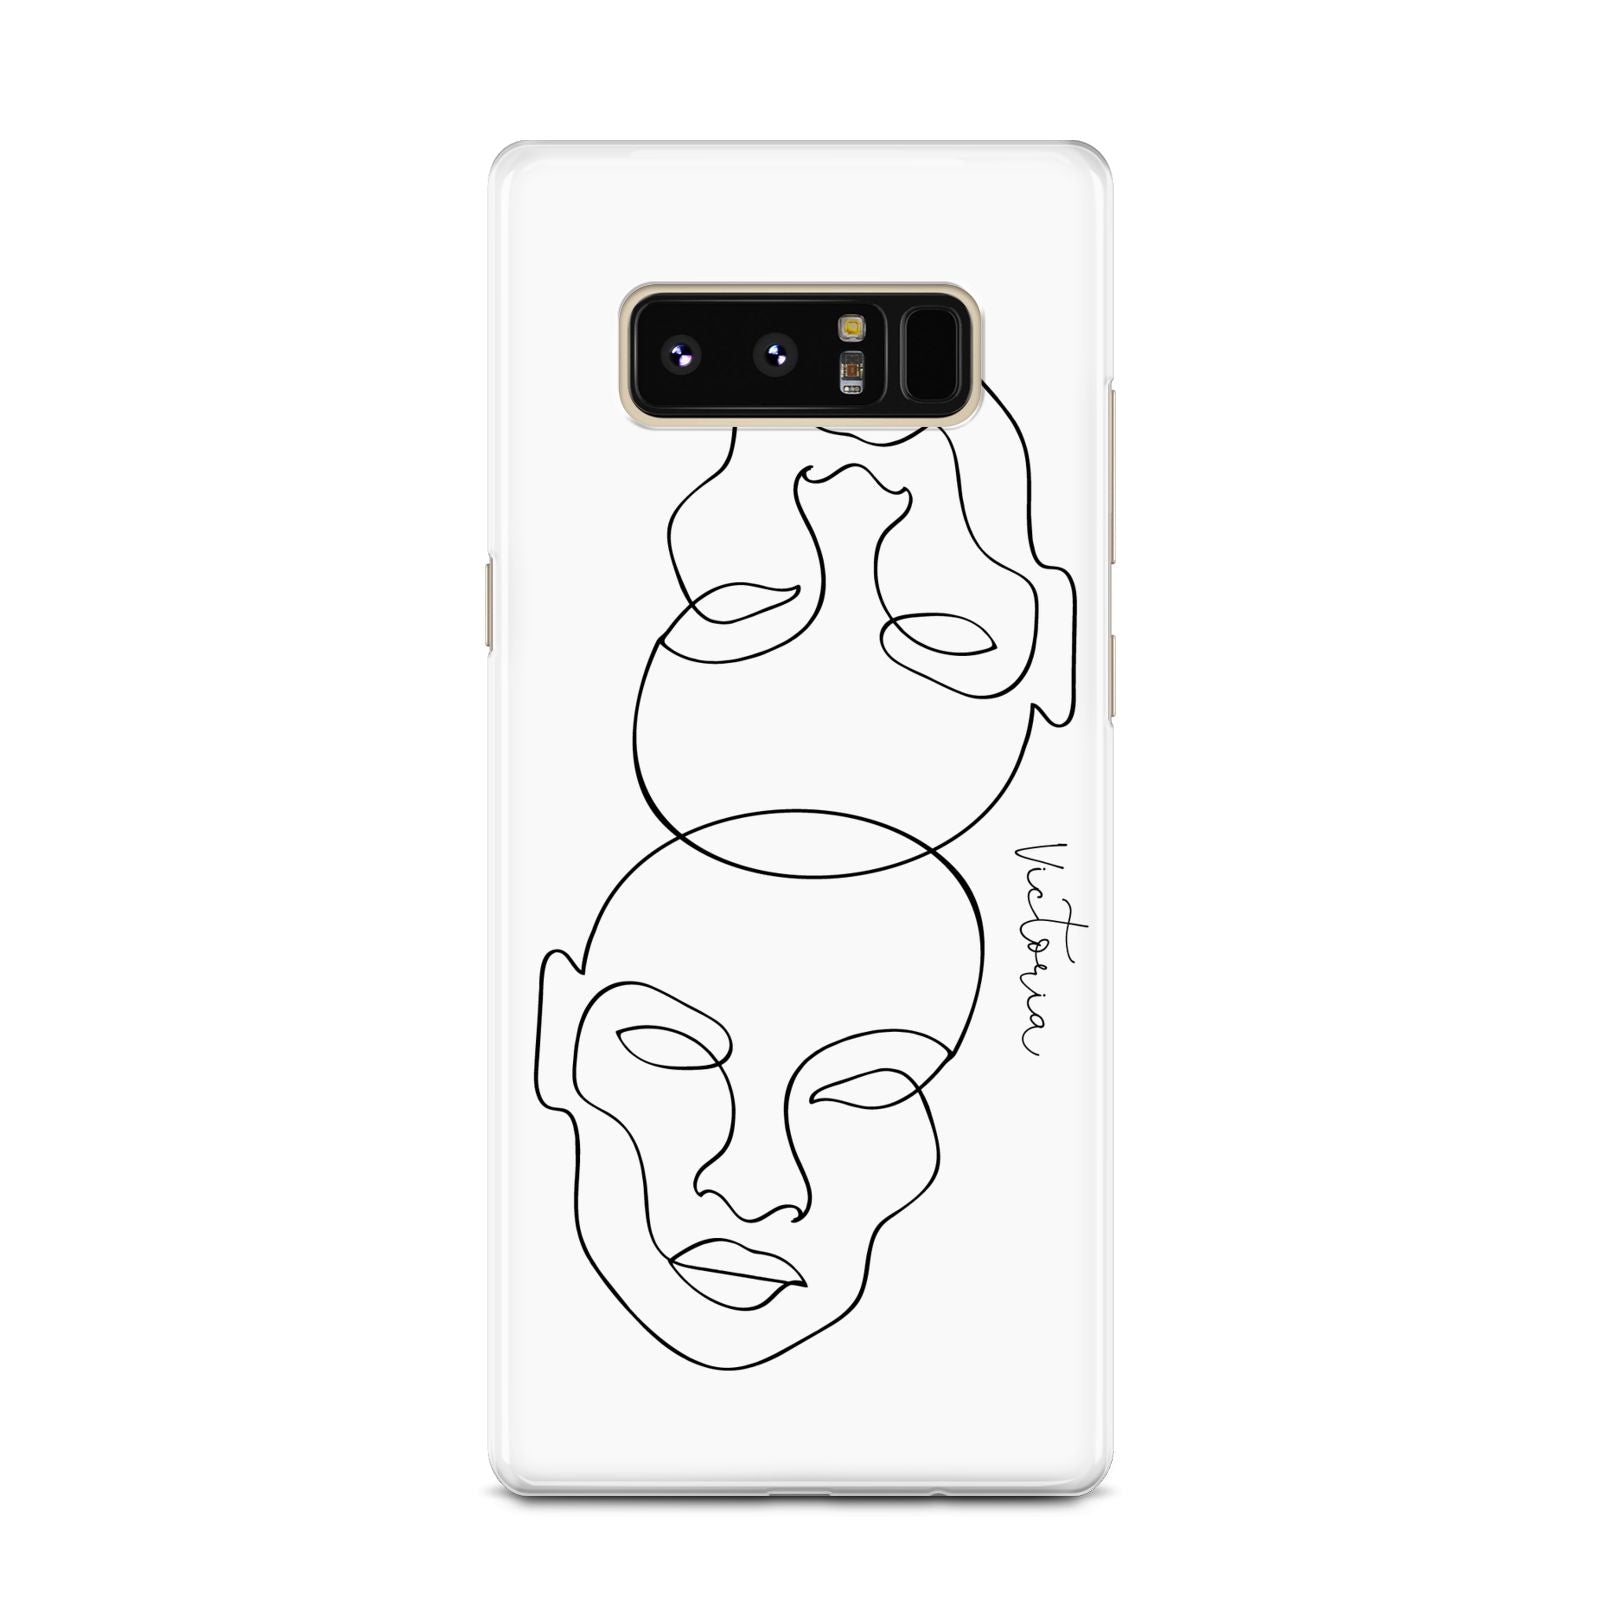 Personalised White Line Art Samsung Galaxy Note 8 Case